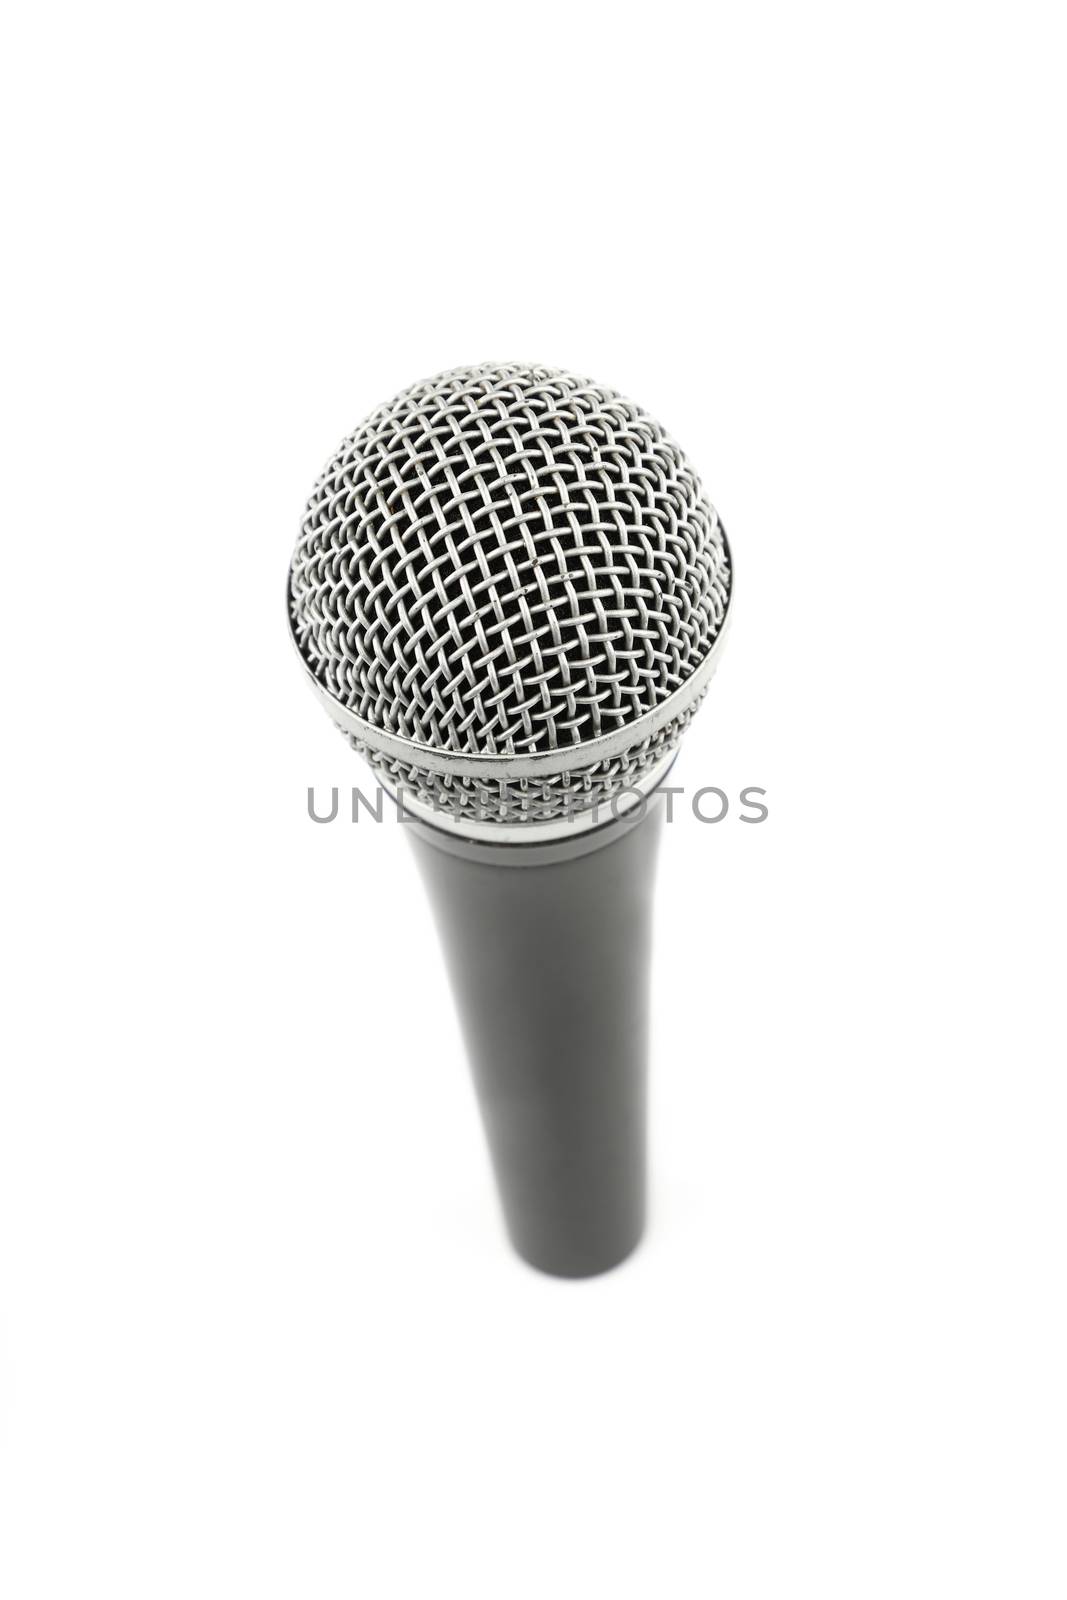 Vocal microphone high angle view close up isolated on white background, personal perspective